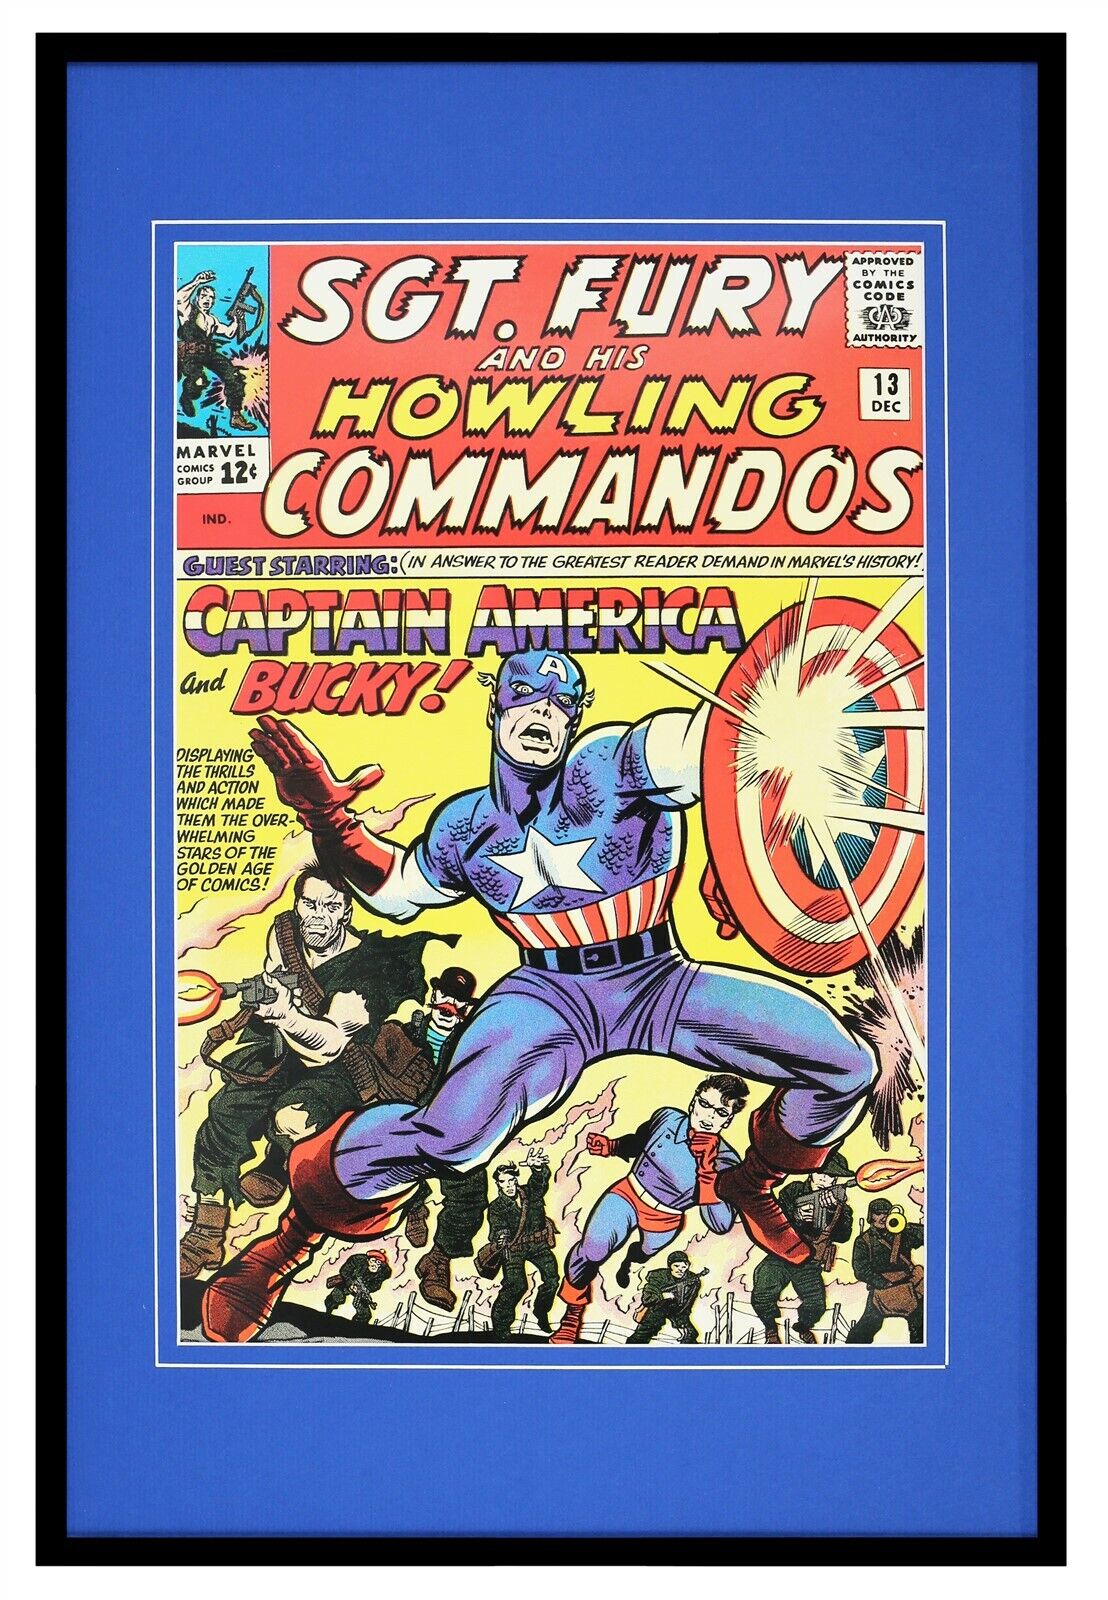 Sgt Fury #13 Captain America Marvel Framed 12x18 Official Repro Cover Display